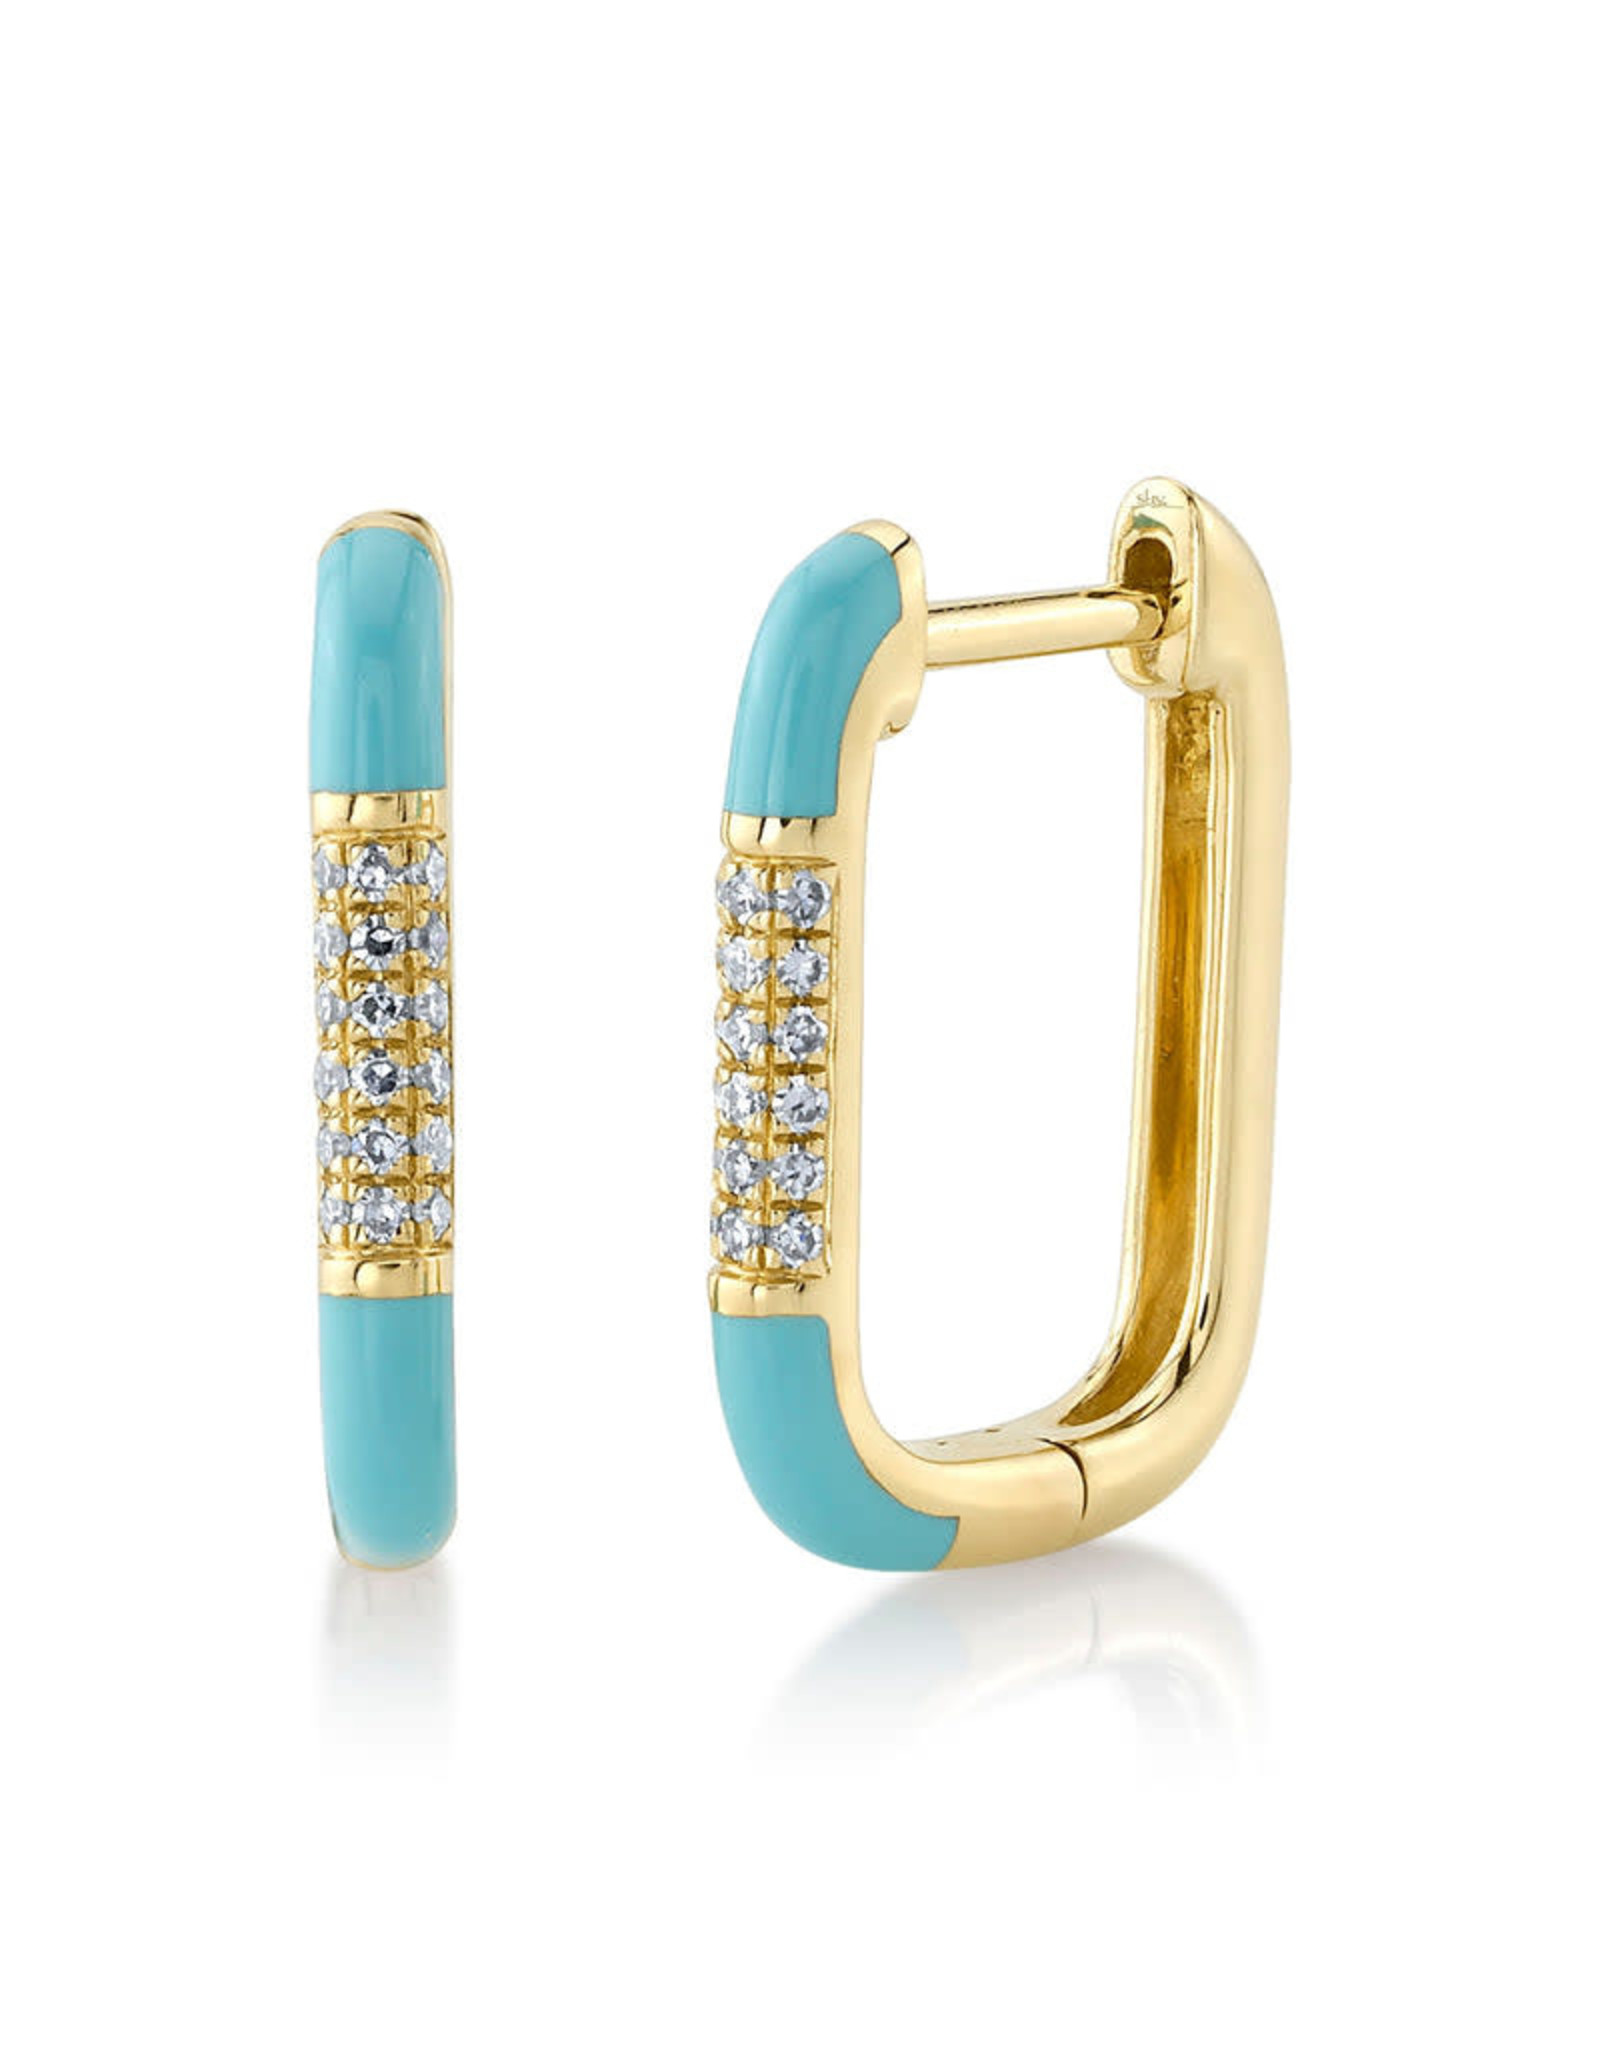 14K Yellow Gold Turquoise Enamel and Diamond Earrings, D: 0.08ct